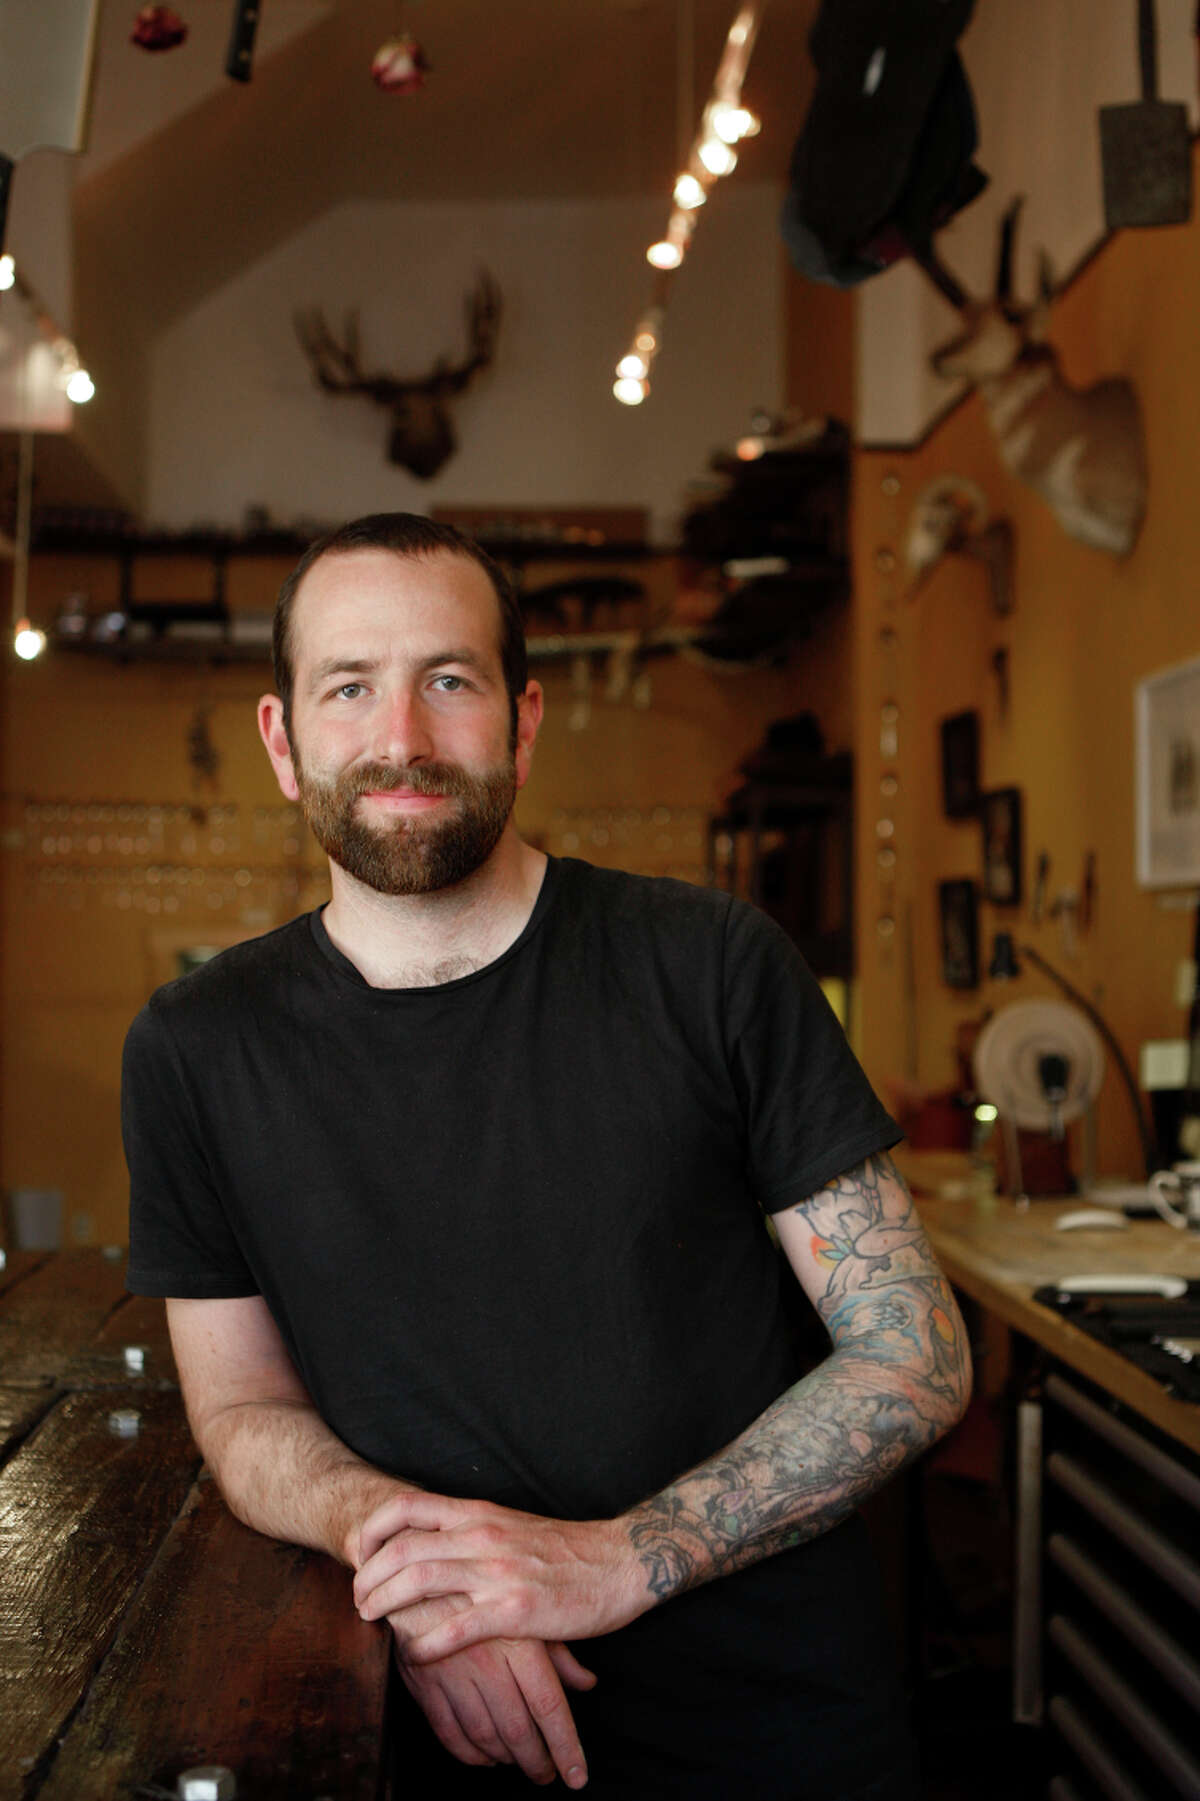 Galen Garretson worked at Quince before opening his boutique knife shop, Town Cutler on Nob Hill.